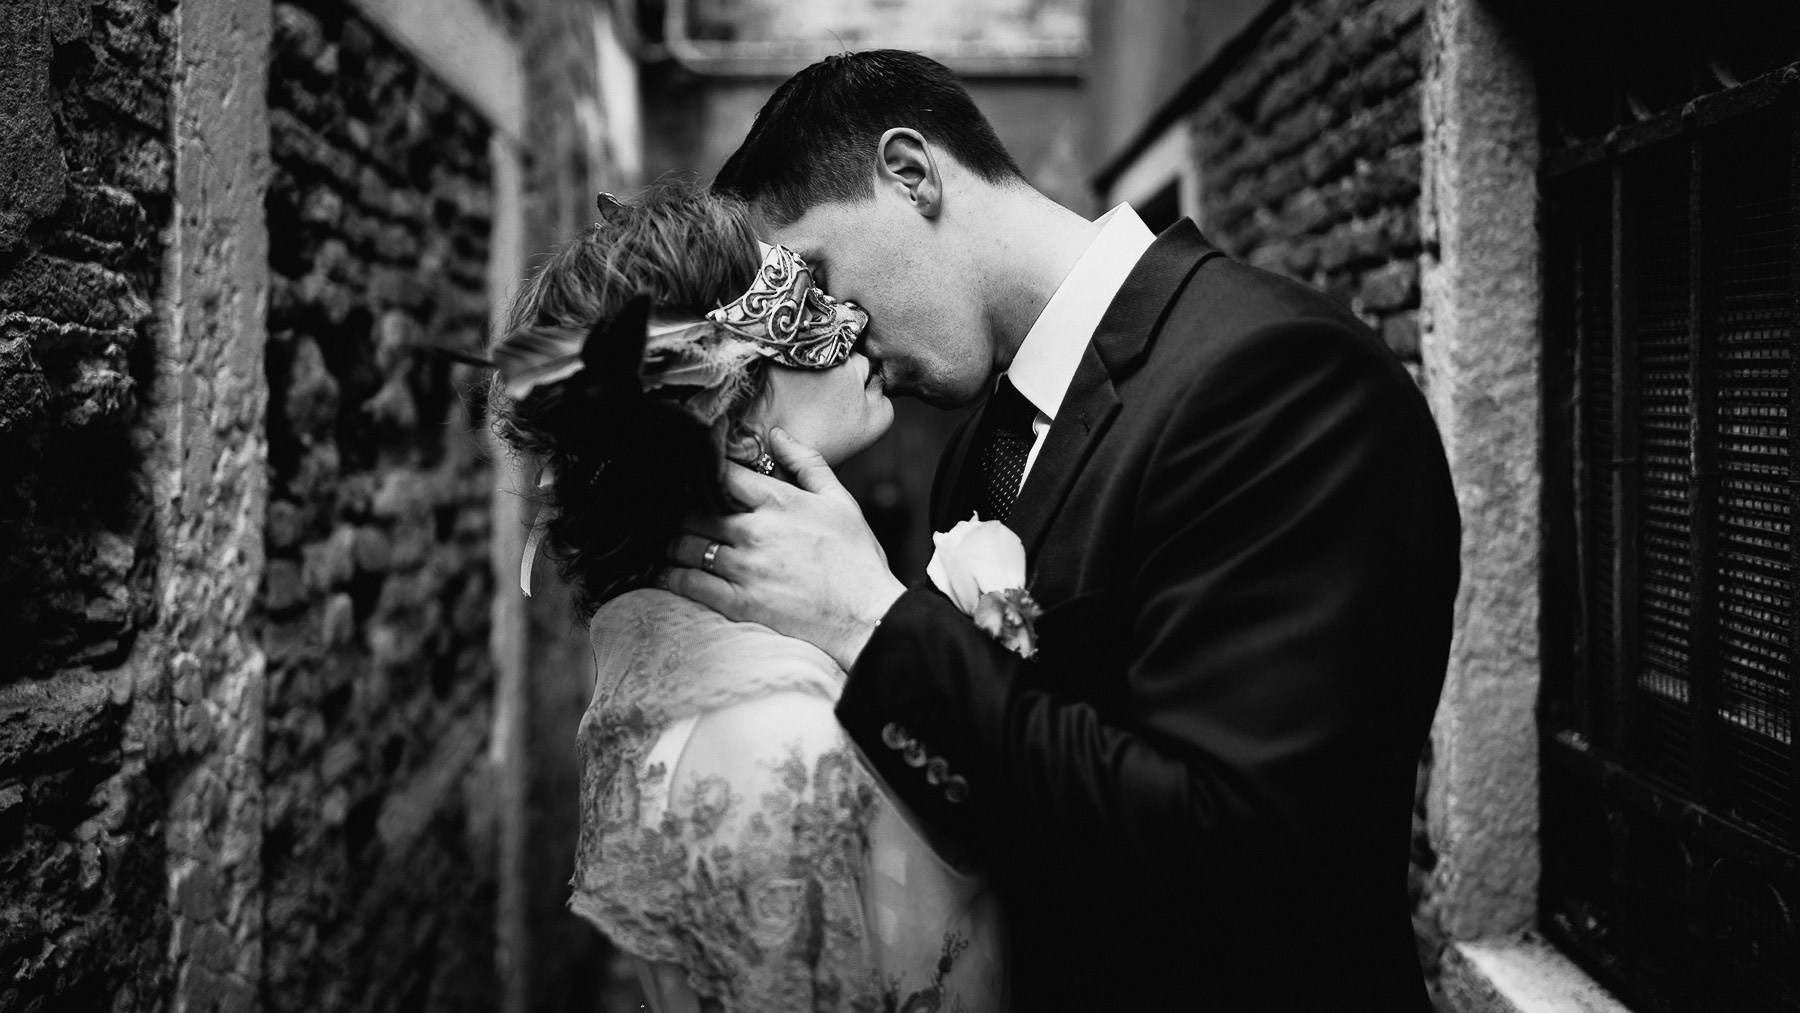 eloping in italy venice wedding photographer intimate elopement